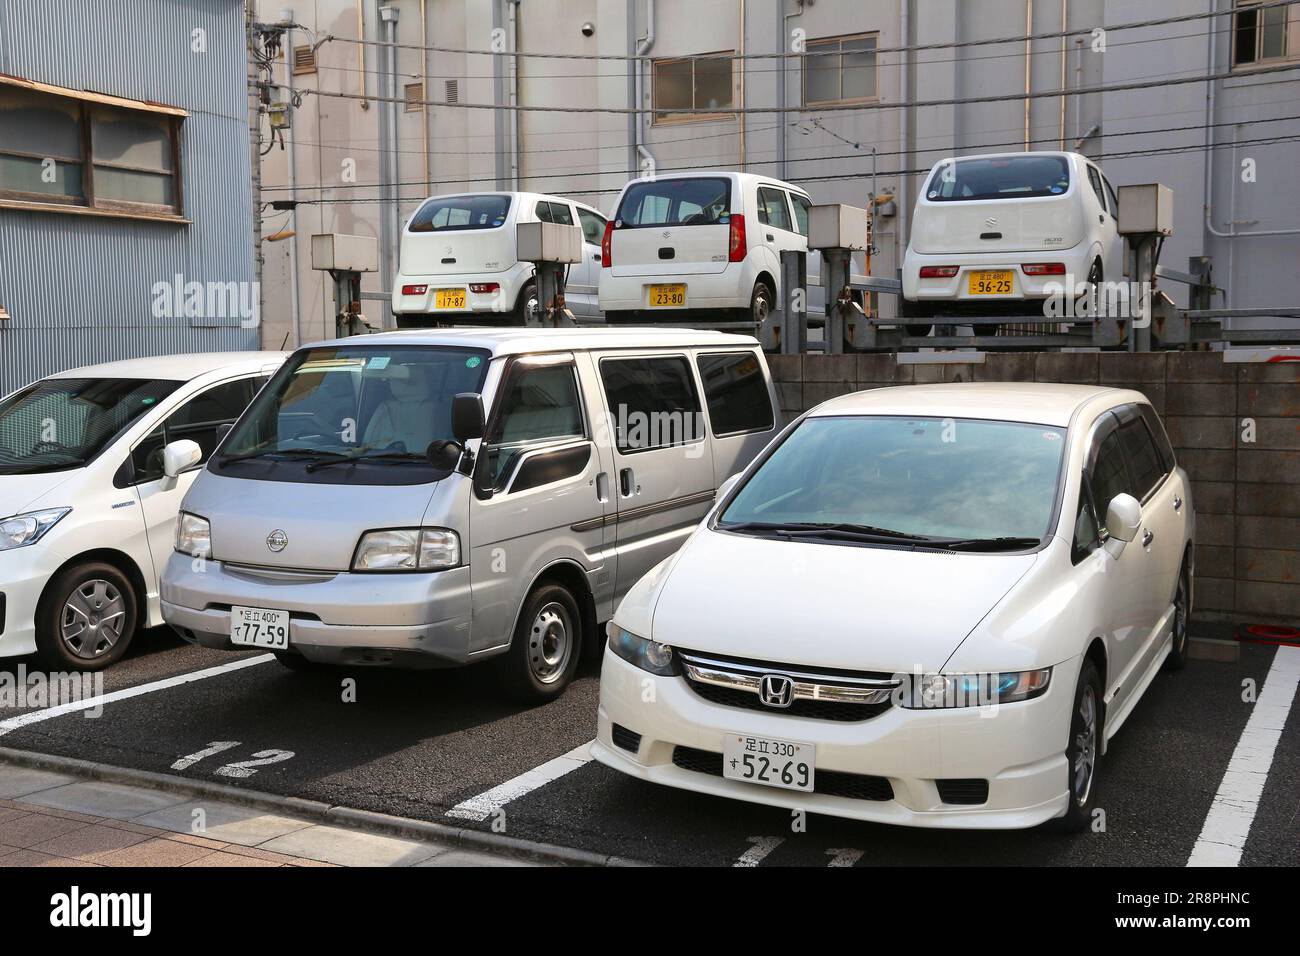 TOKYO, JAPAN - NOVEMBER 30, 2016: Nissan kei car, Honda and Suzuki cars parked in Tokyo, Japan. There are approximately 68.9 million cars registered i Stock Photo